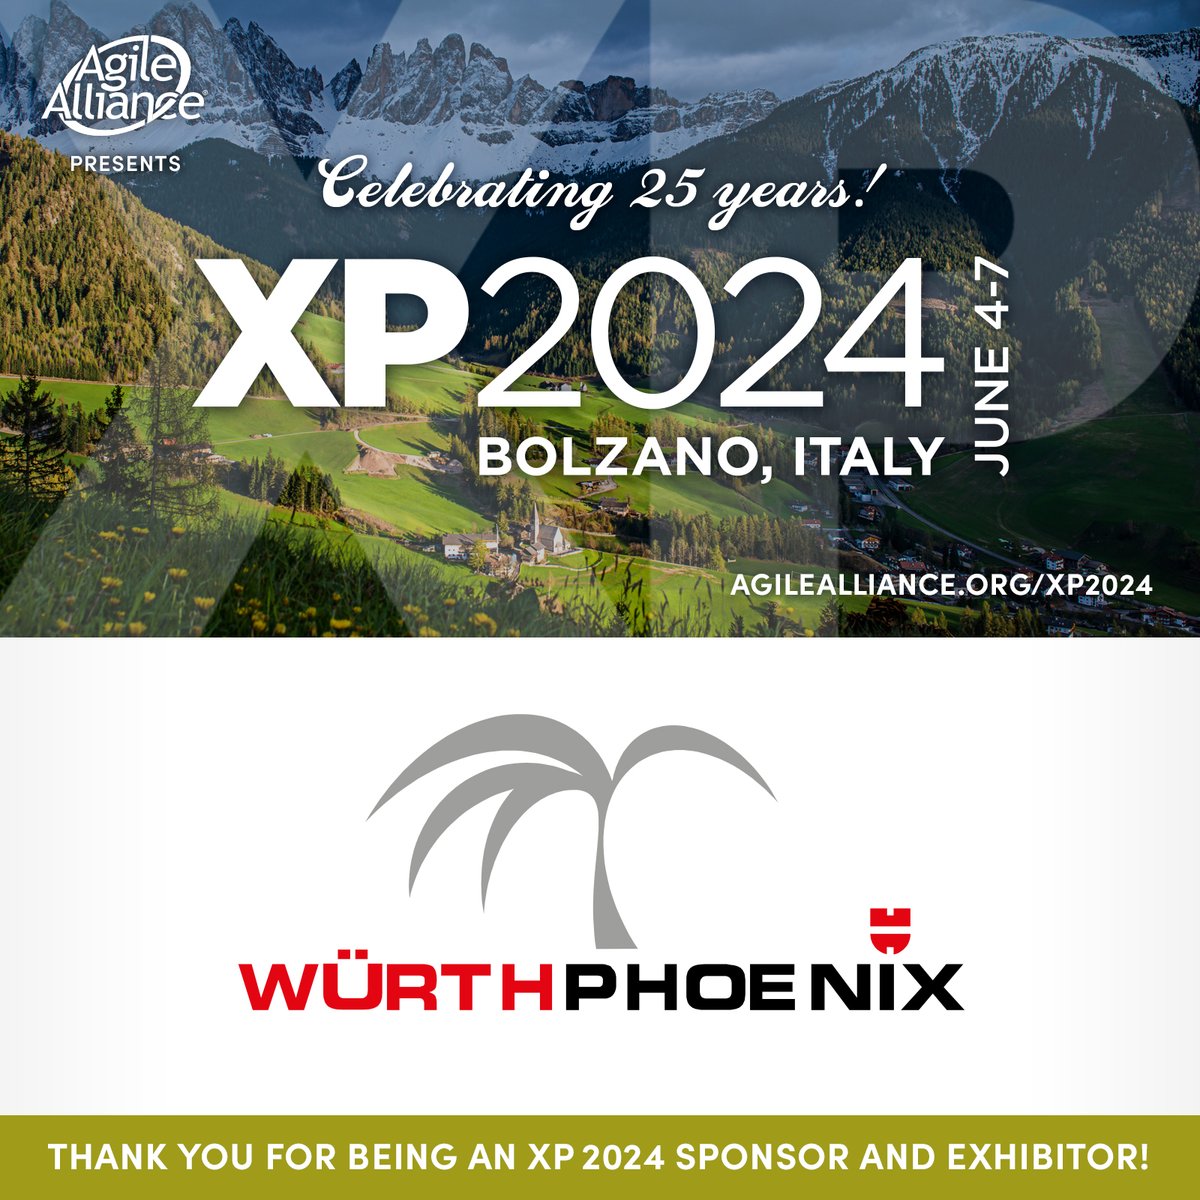 We're very grateful to @WuerthPhoenix for sponsoring #XP2024 next week in Bolzano, Italy! Please join us in thanking them for their valued support as we celebrate the 25th Anniversary of #XP. And, be sure to visit the Würth Phoenix team at XP 2024! agilealliance.org/xp2024/